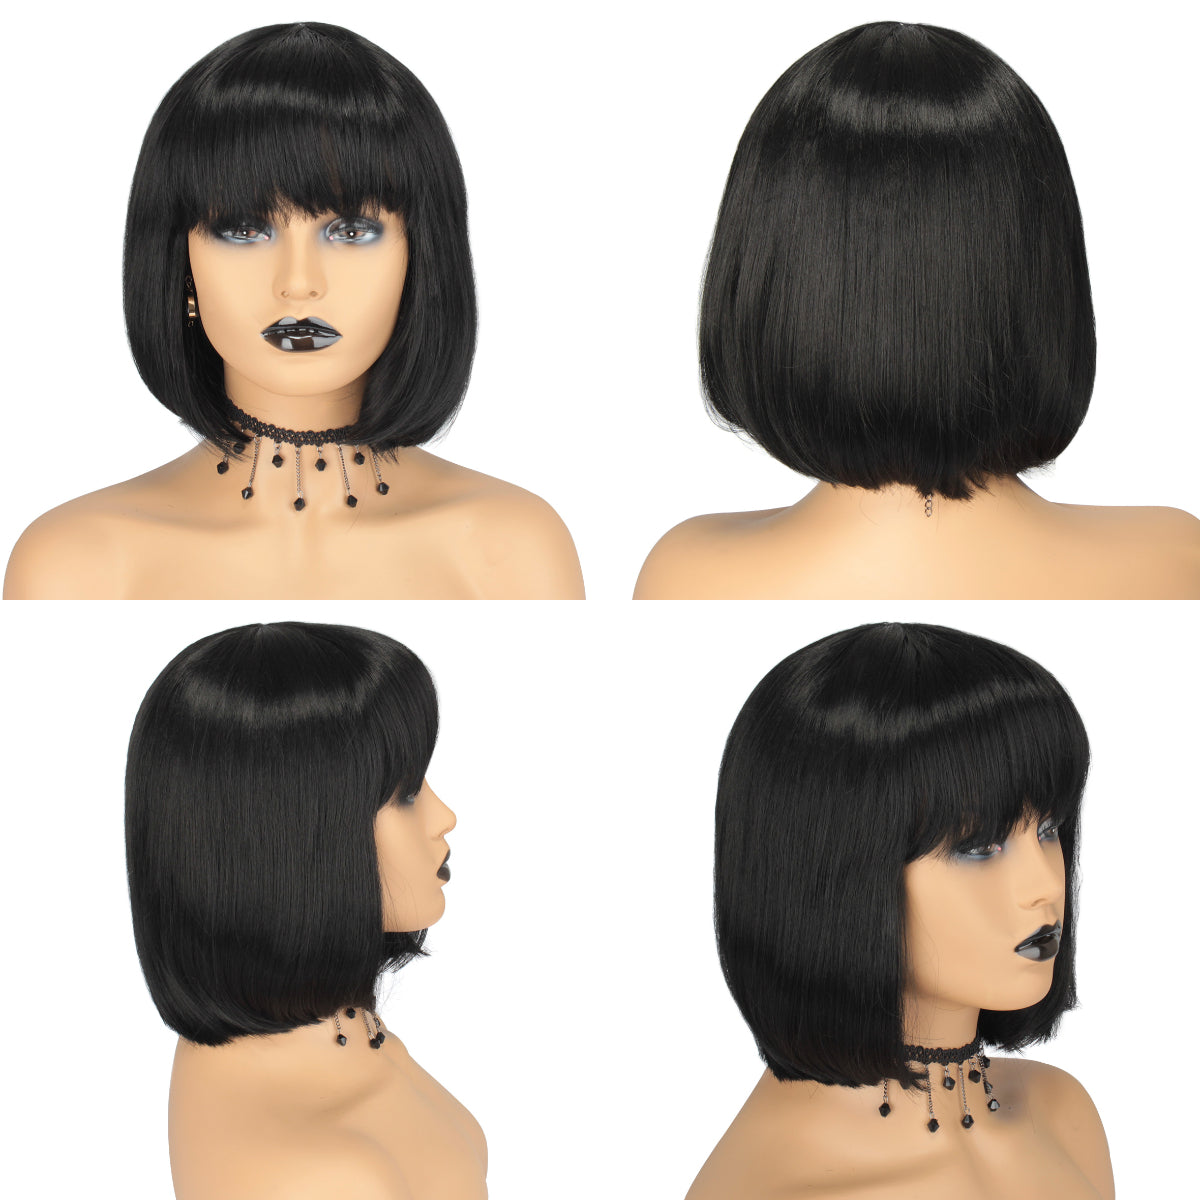 Lace Short Bob Wigs Brazilian Remy Hair Meddle Ratio Red Blue Yellow Orange 613 Lace Front Synthetic Hair Wigs